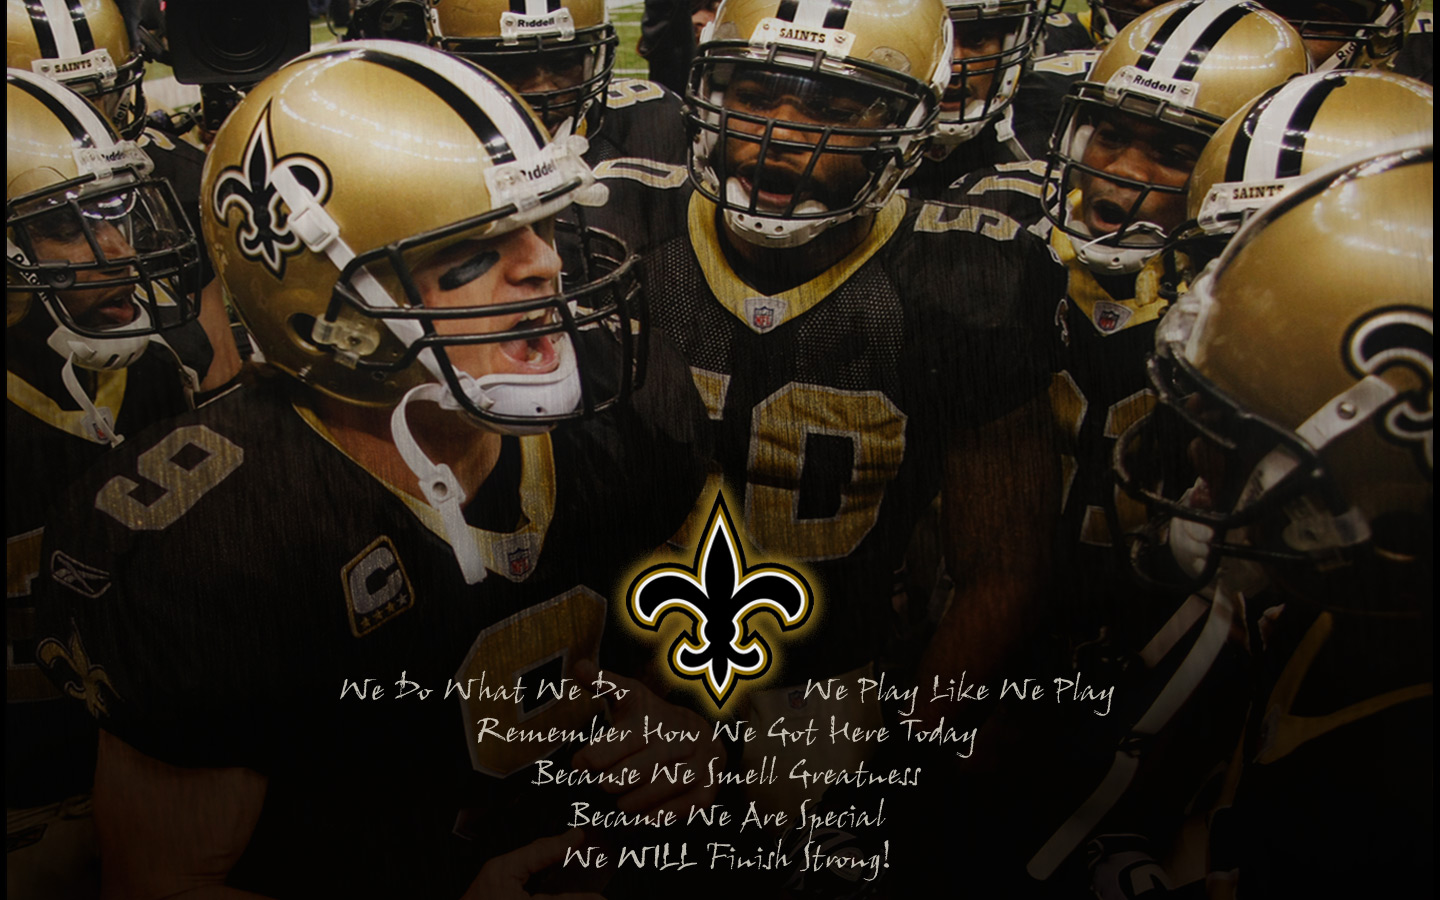  the day New Orleans Saints wallpaper New Orleans Saints wallpapers